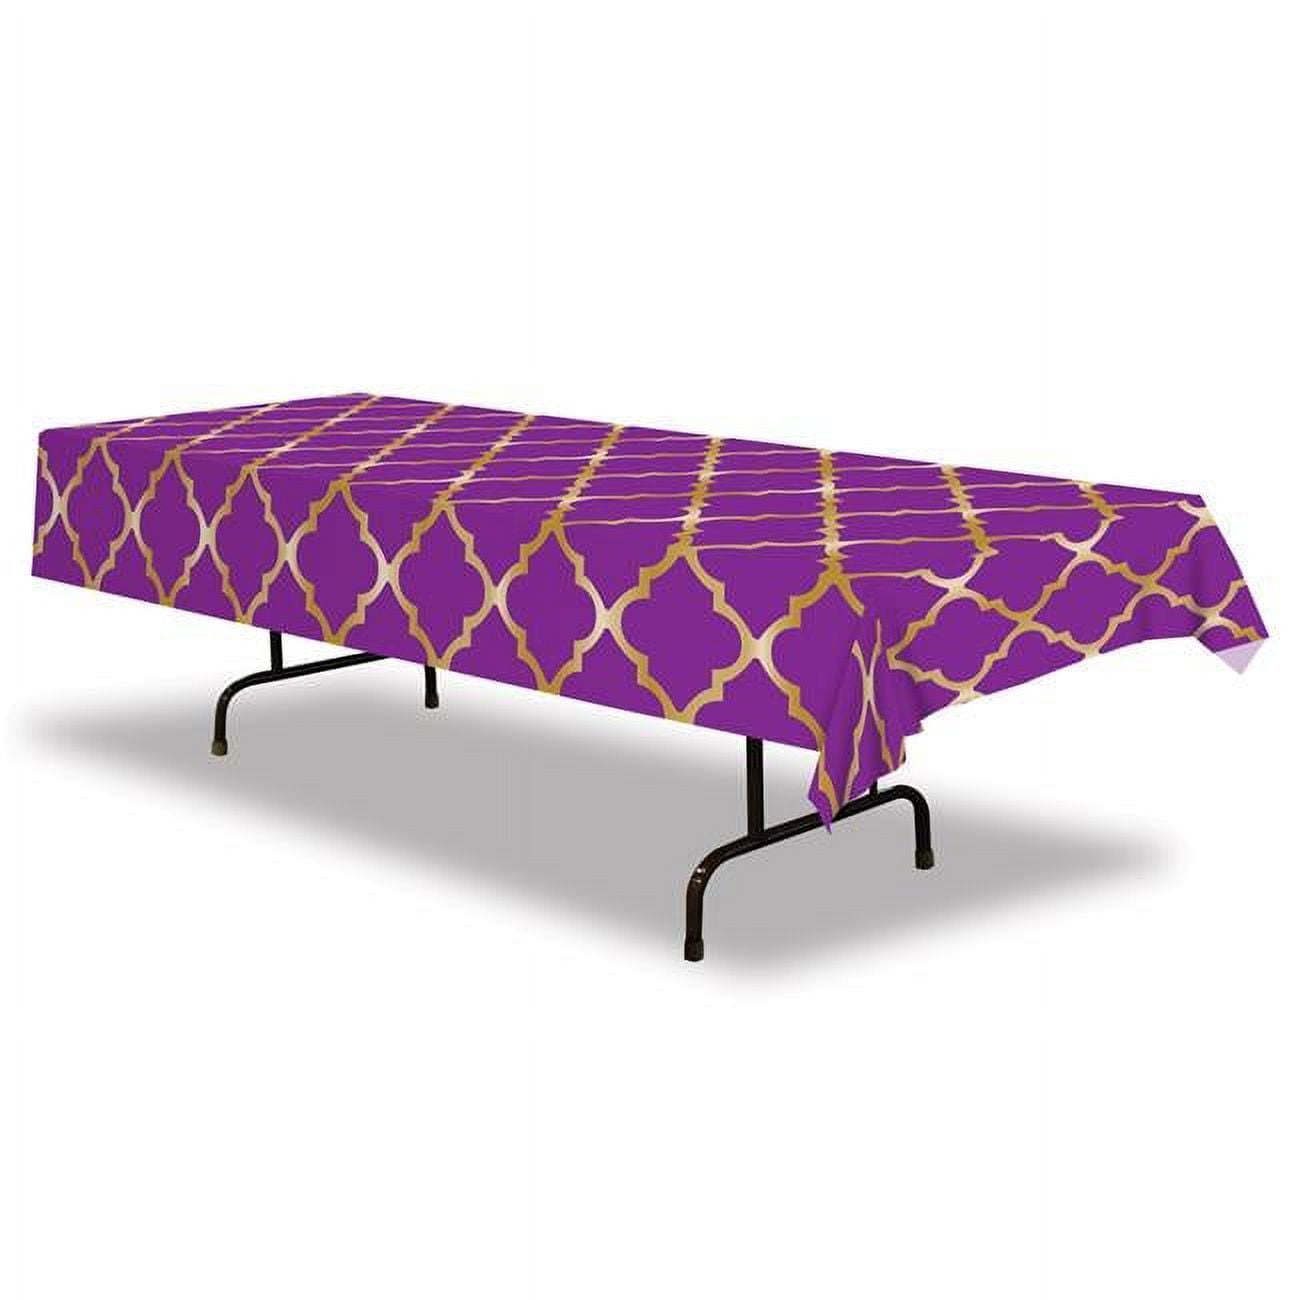 Picture of Beistle 53576 54 x 108 in. Plastic Lattice Tablecover - Pack of 12